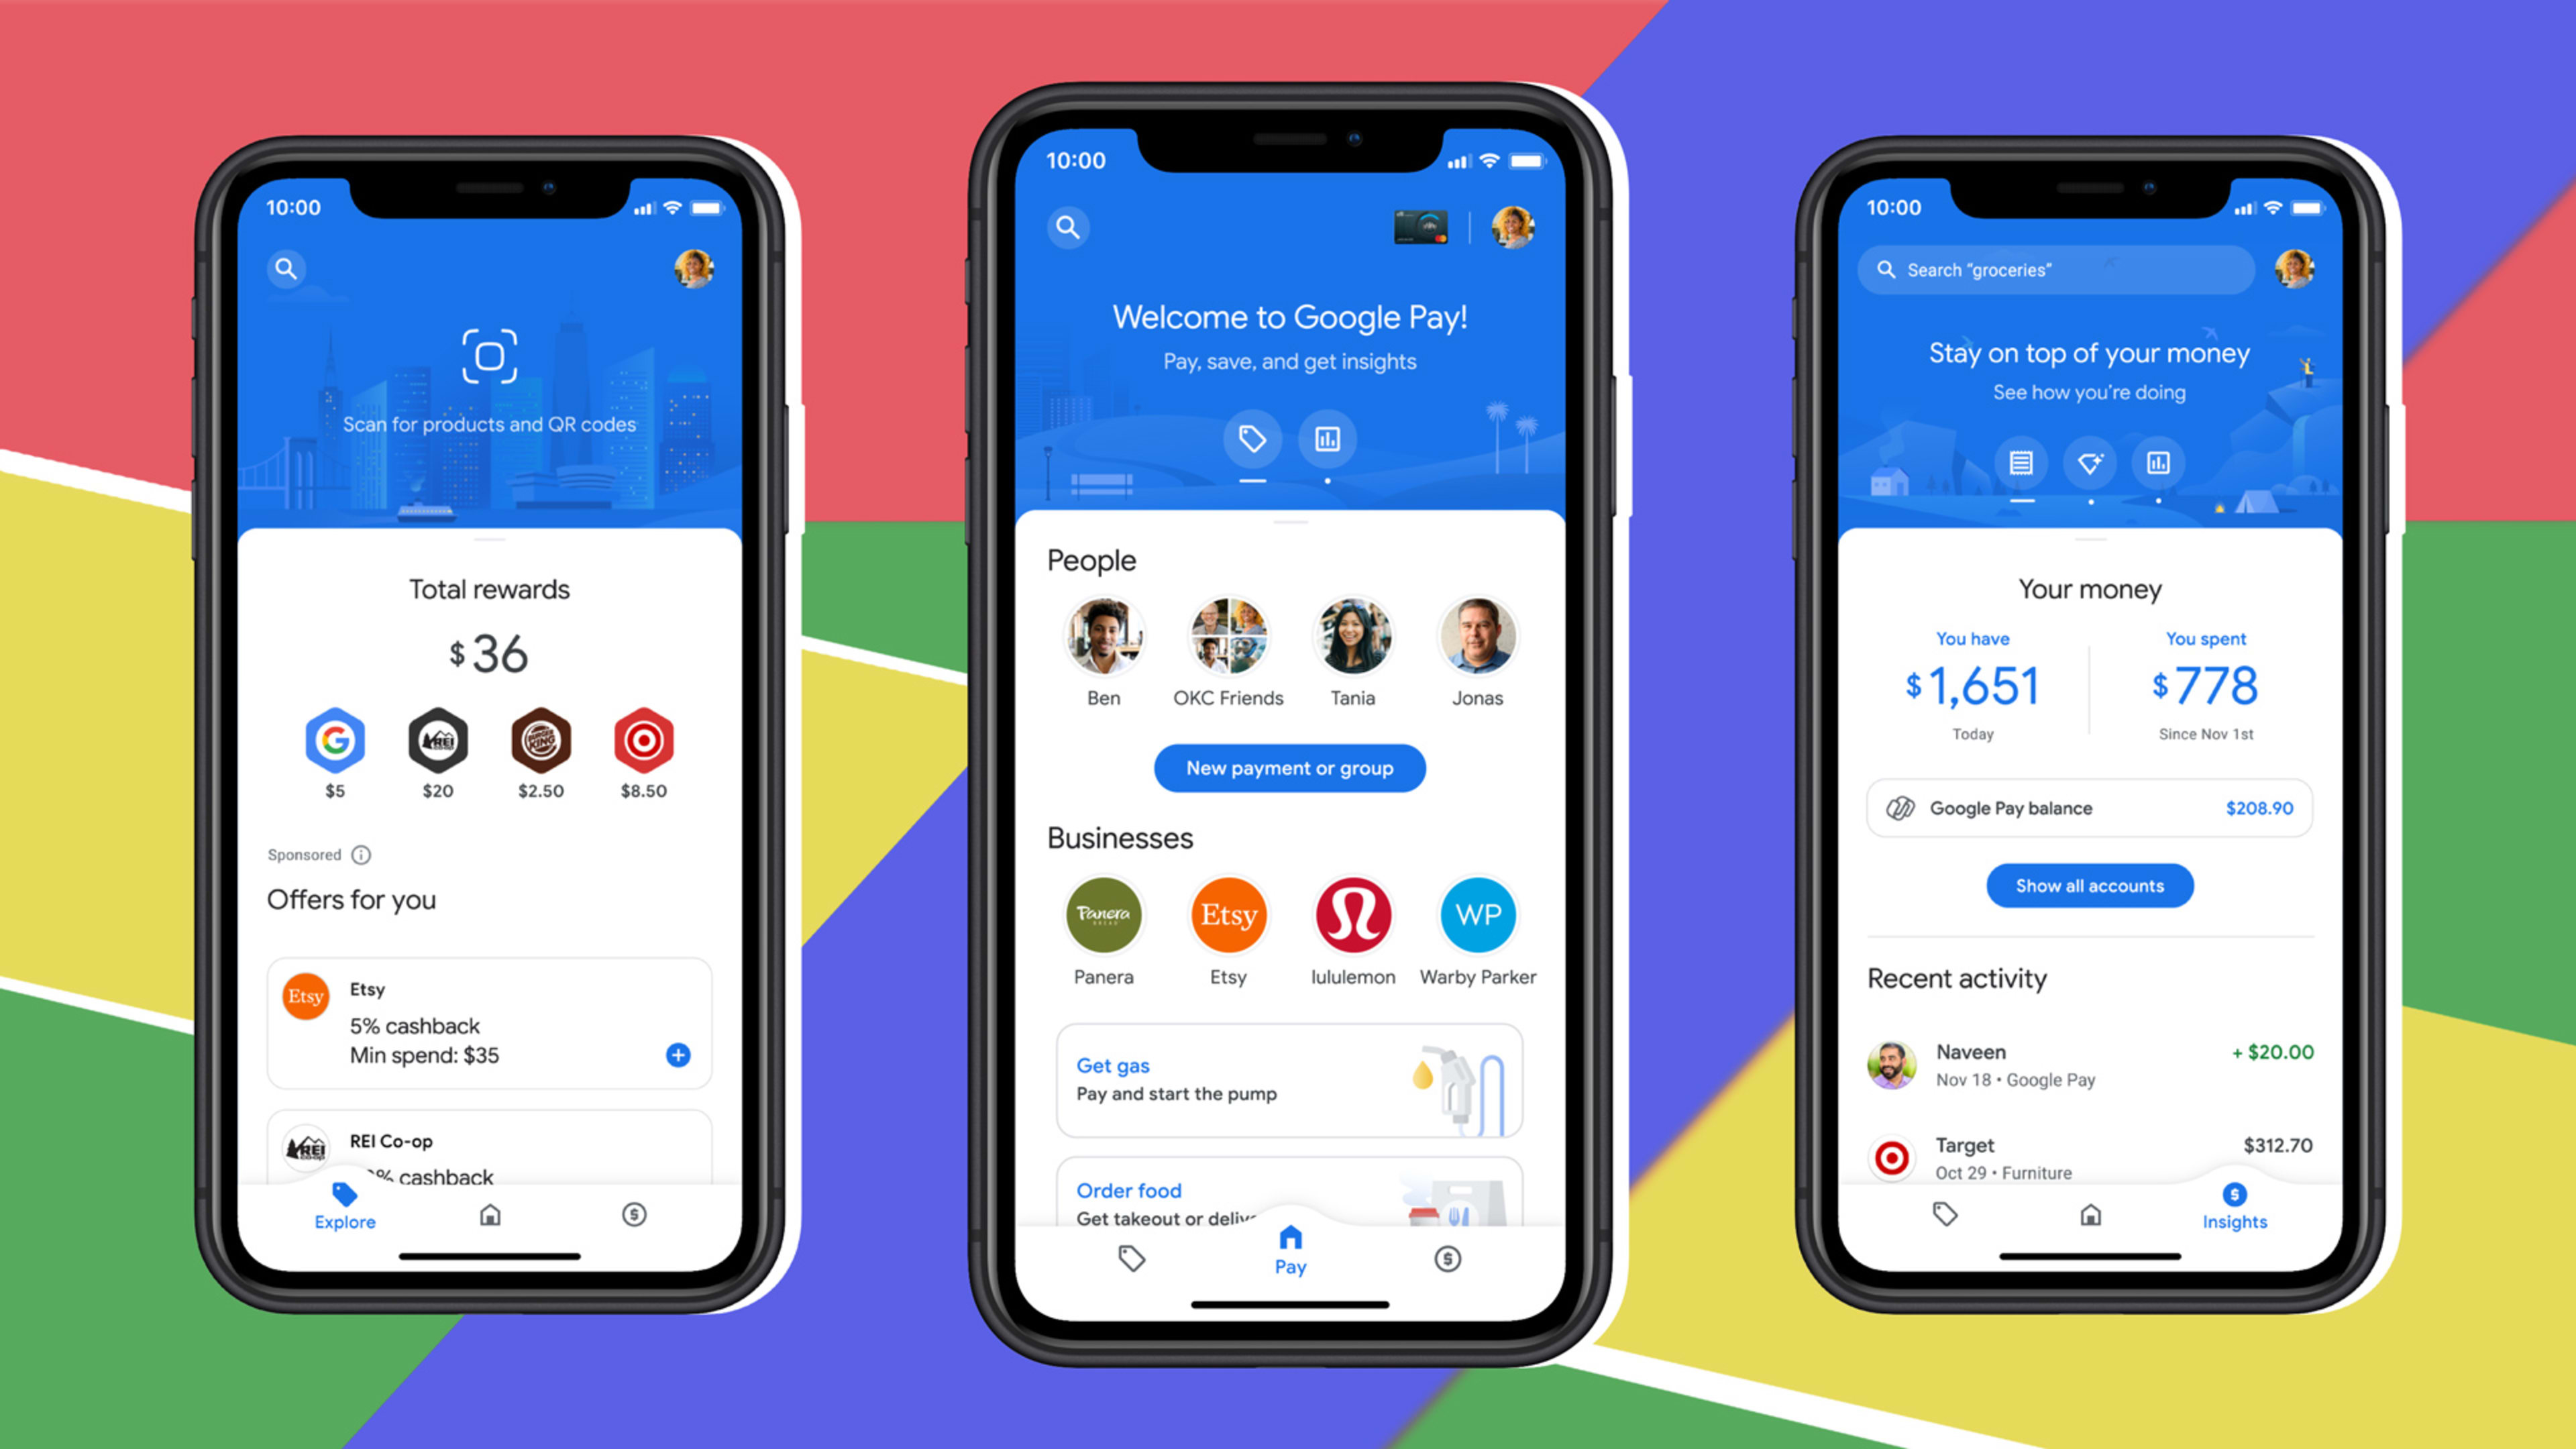 Google Pay’s new redesign sums up the best and worst of Google